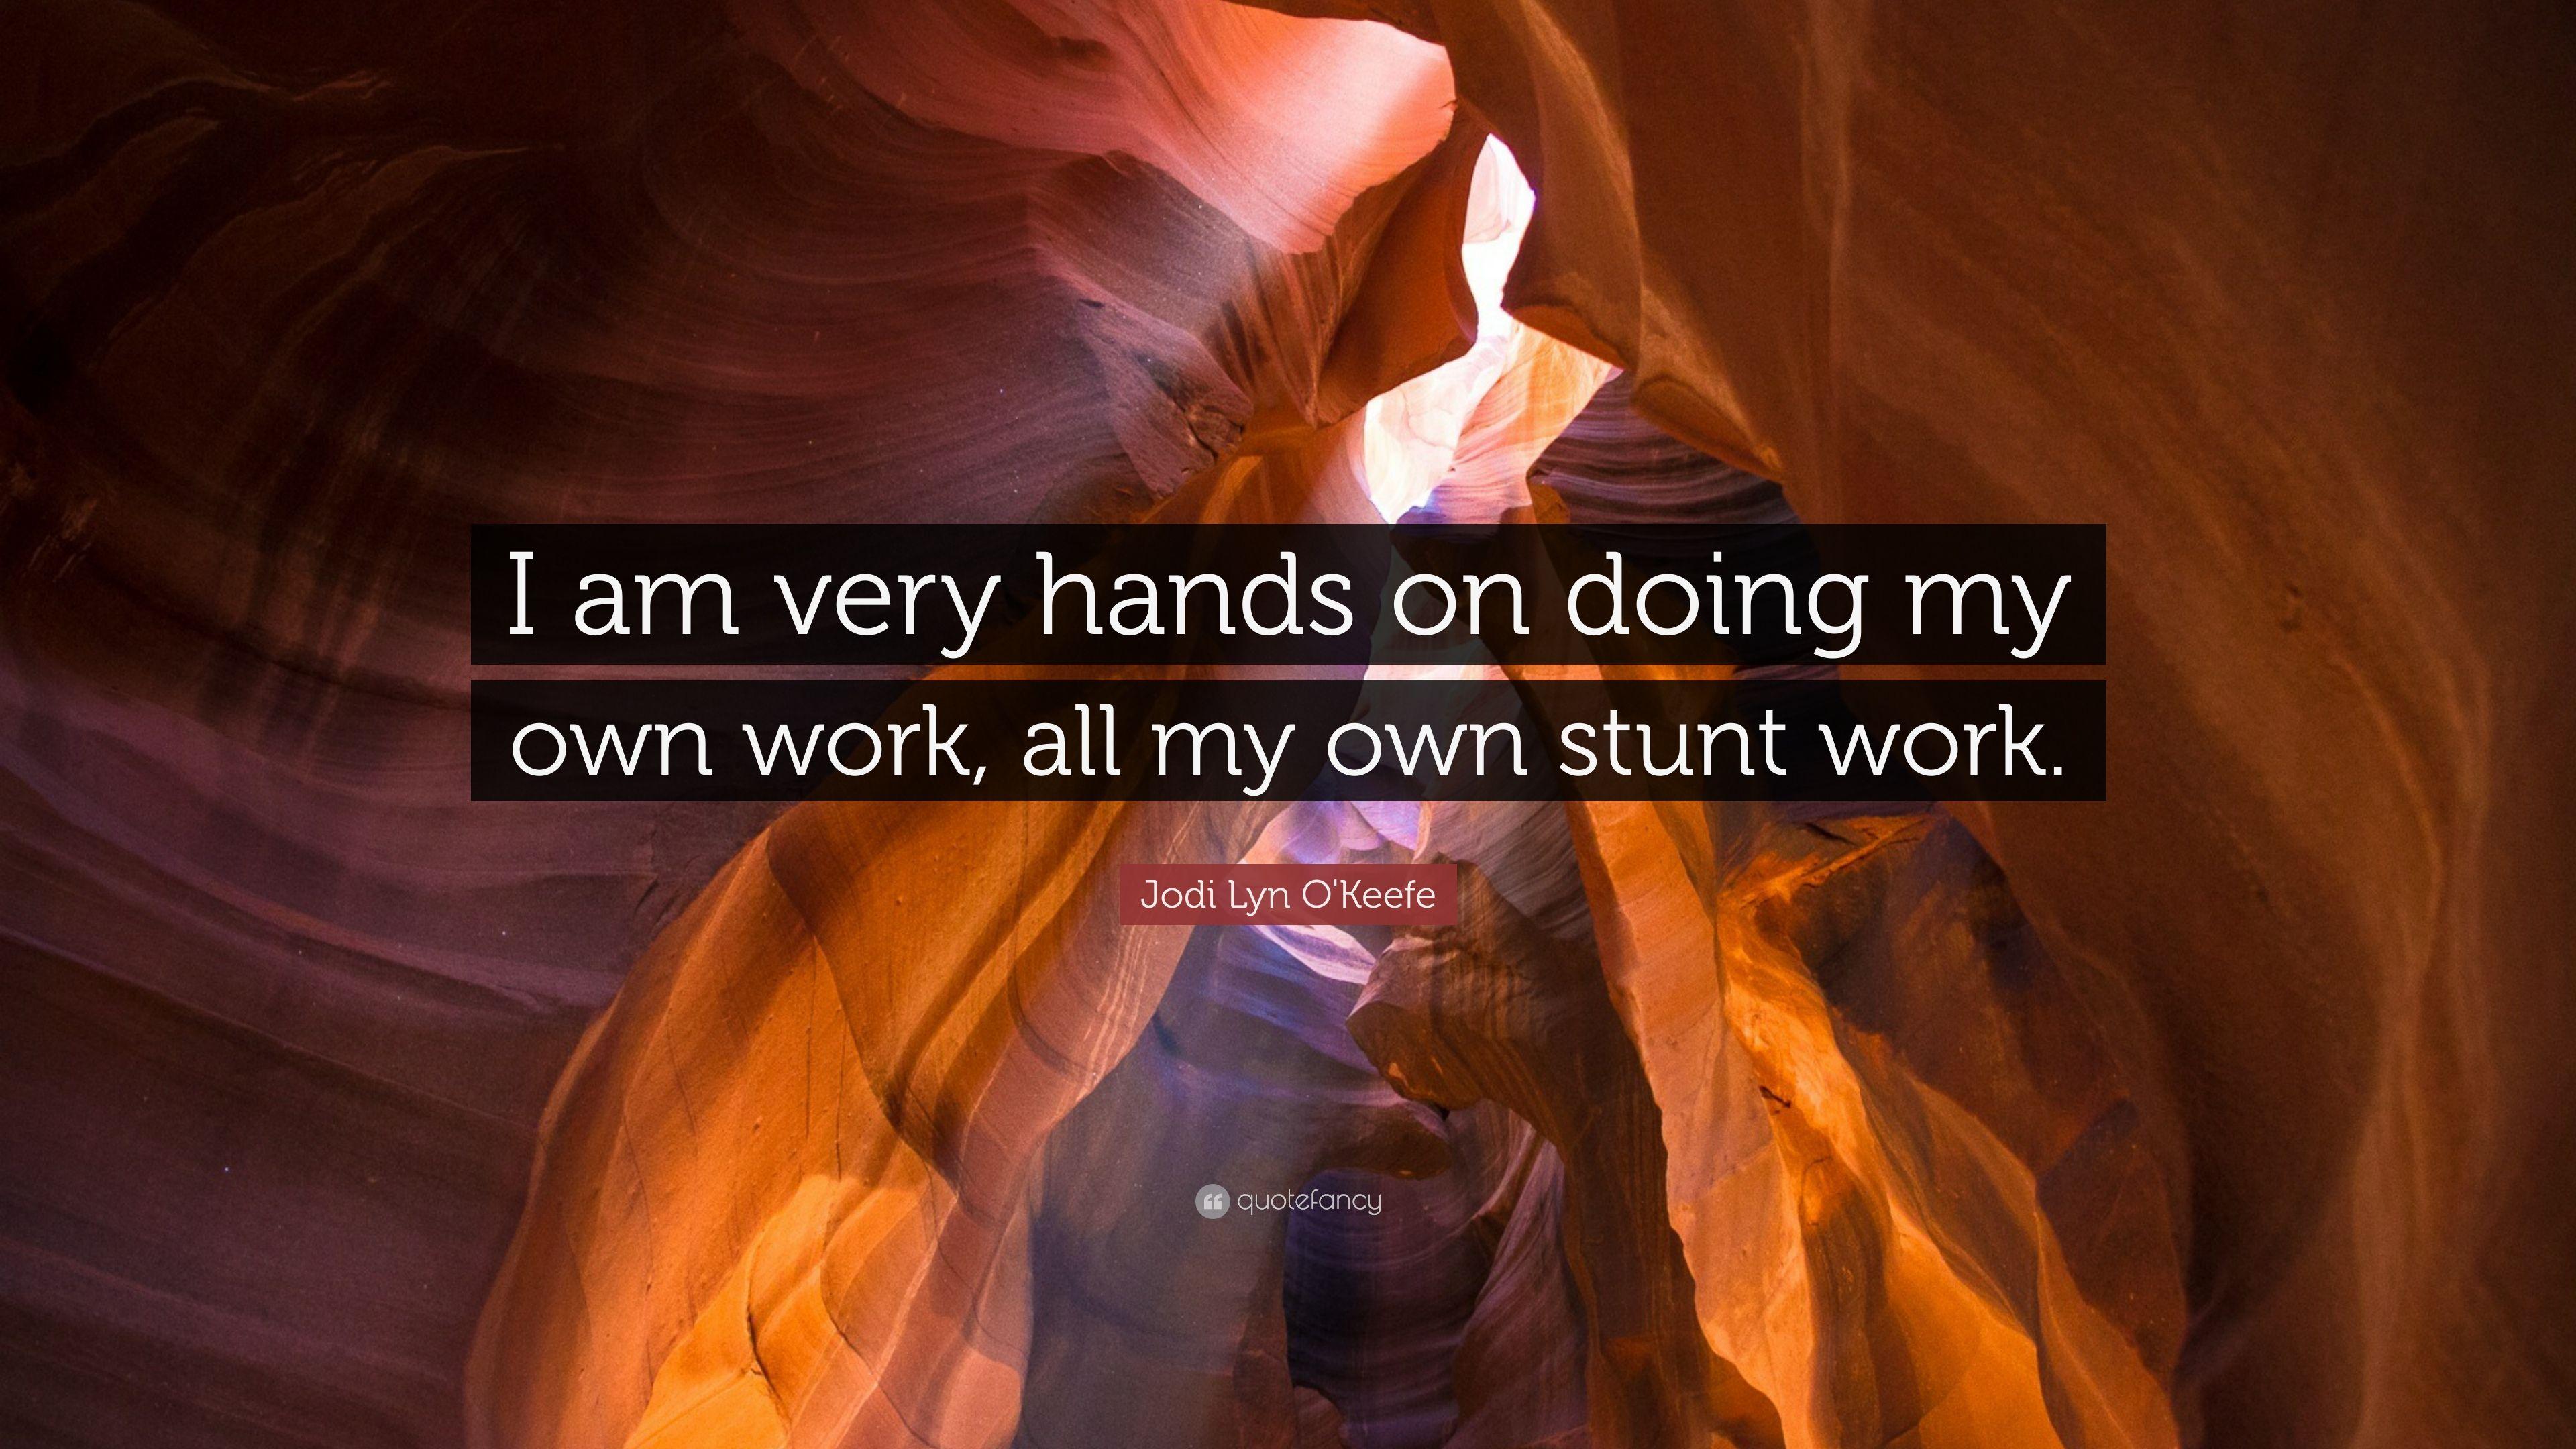 Jodi Lyn O'Keefe Quote: “I am very hands on doing my own work, all